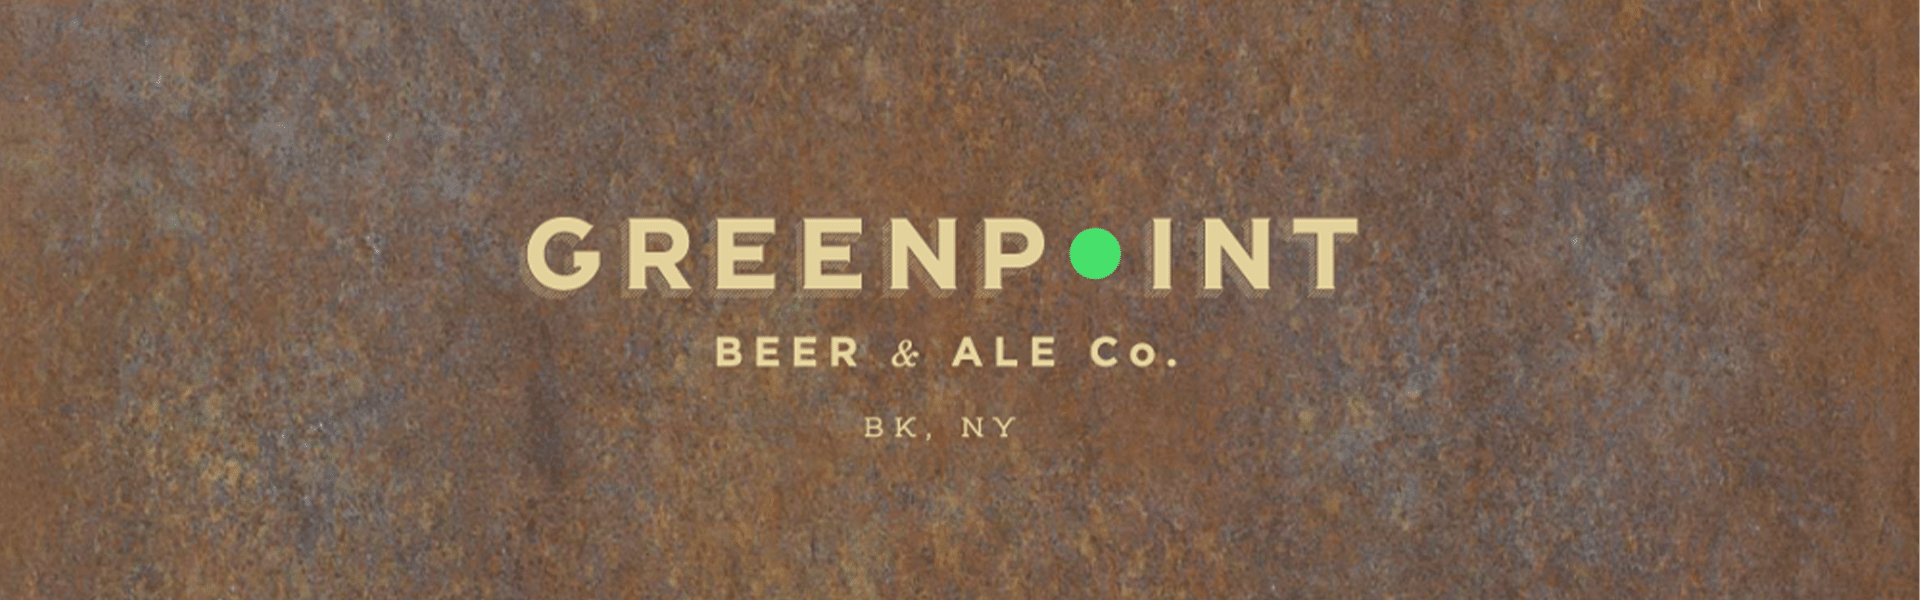 Greenpoint Beer & Ale